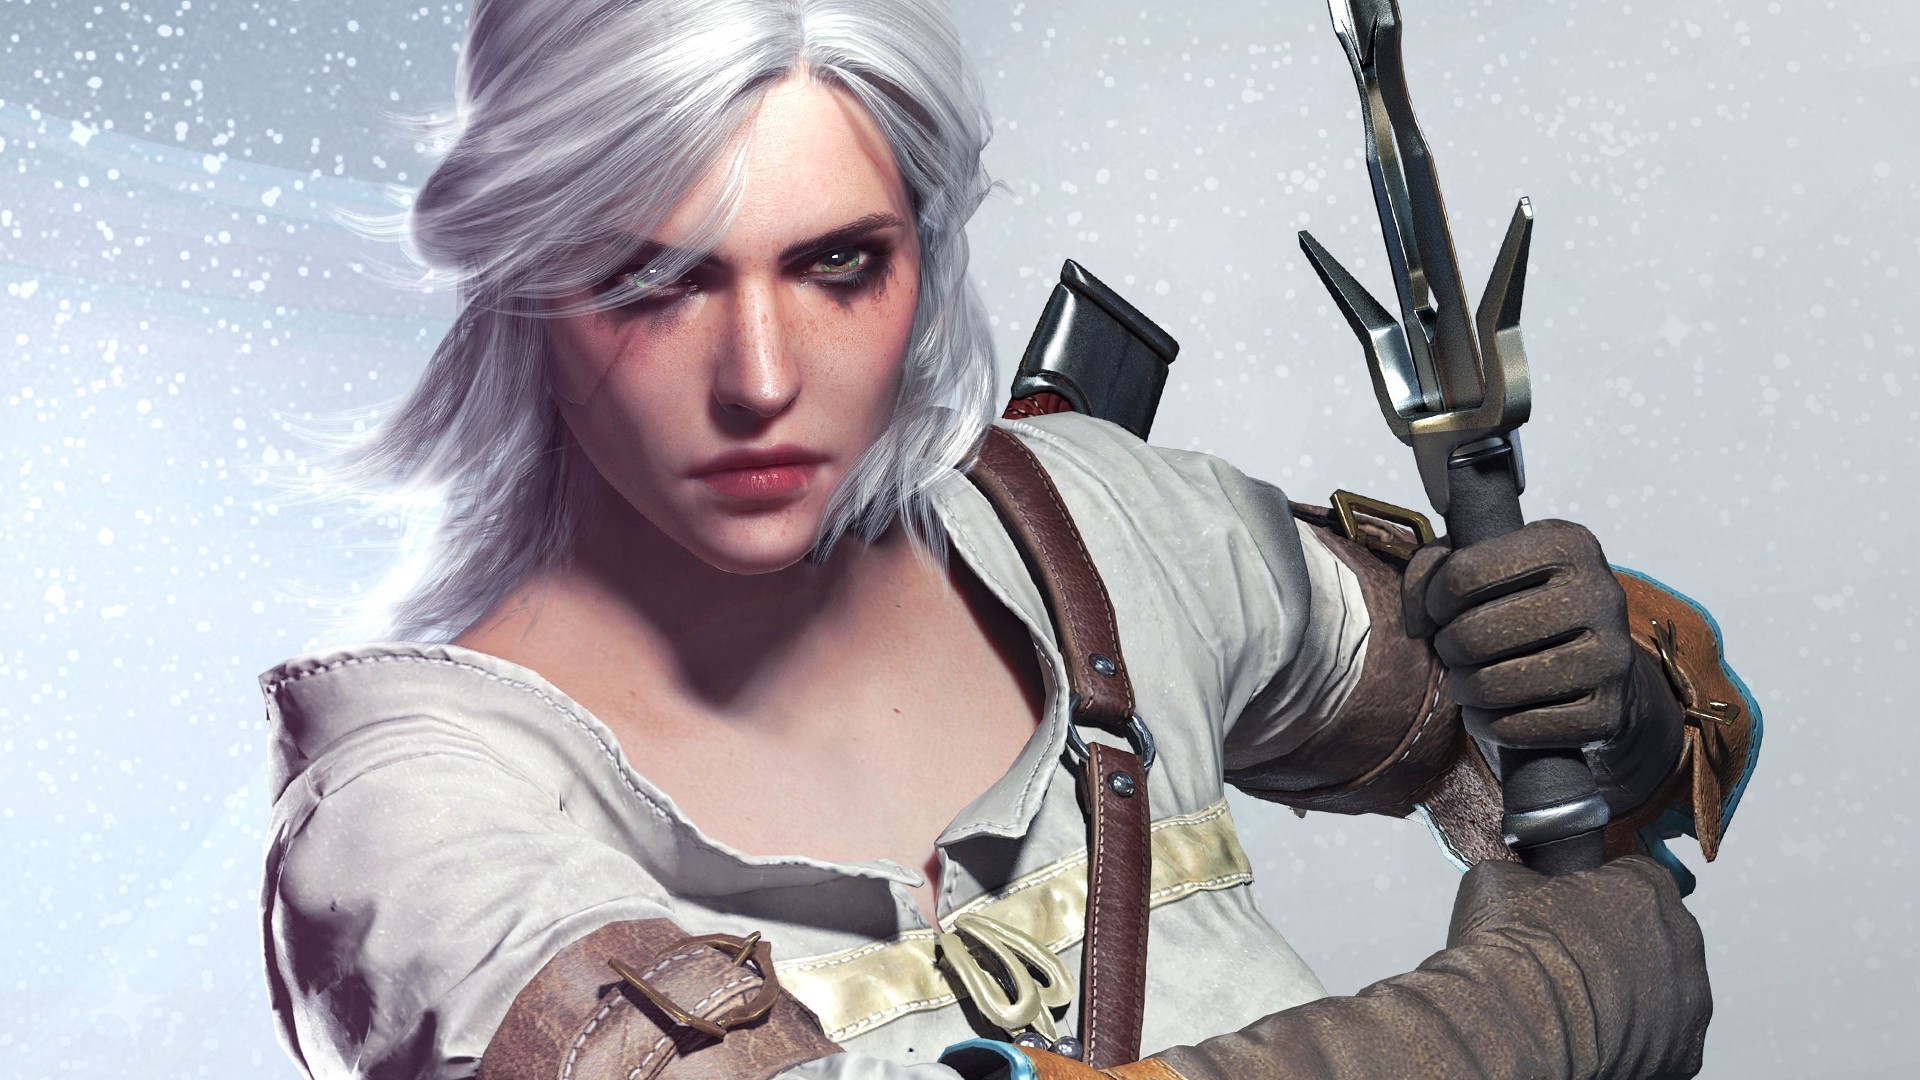 CDPR reveal their release strategy for their new The Witcher trilogy of games, plus a new separate Witcher game and more Cyberpunk 2077.